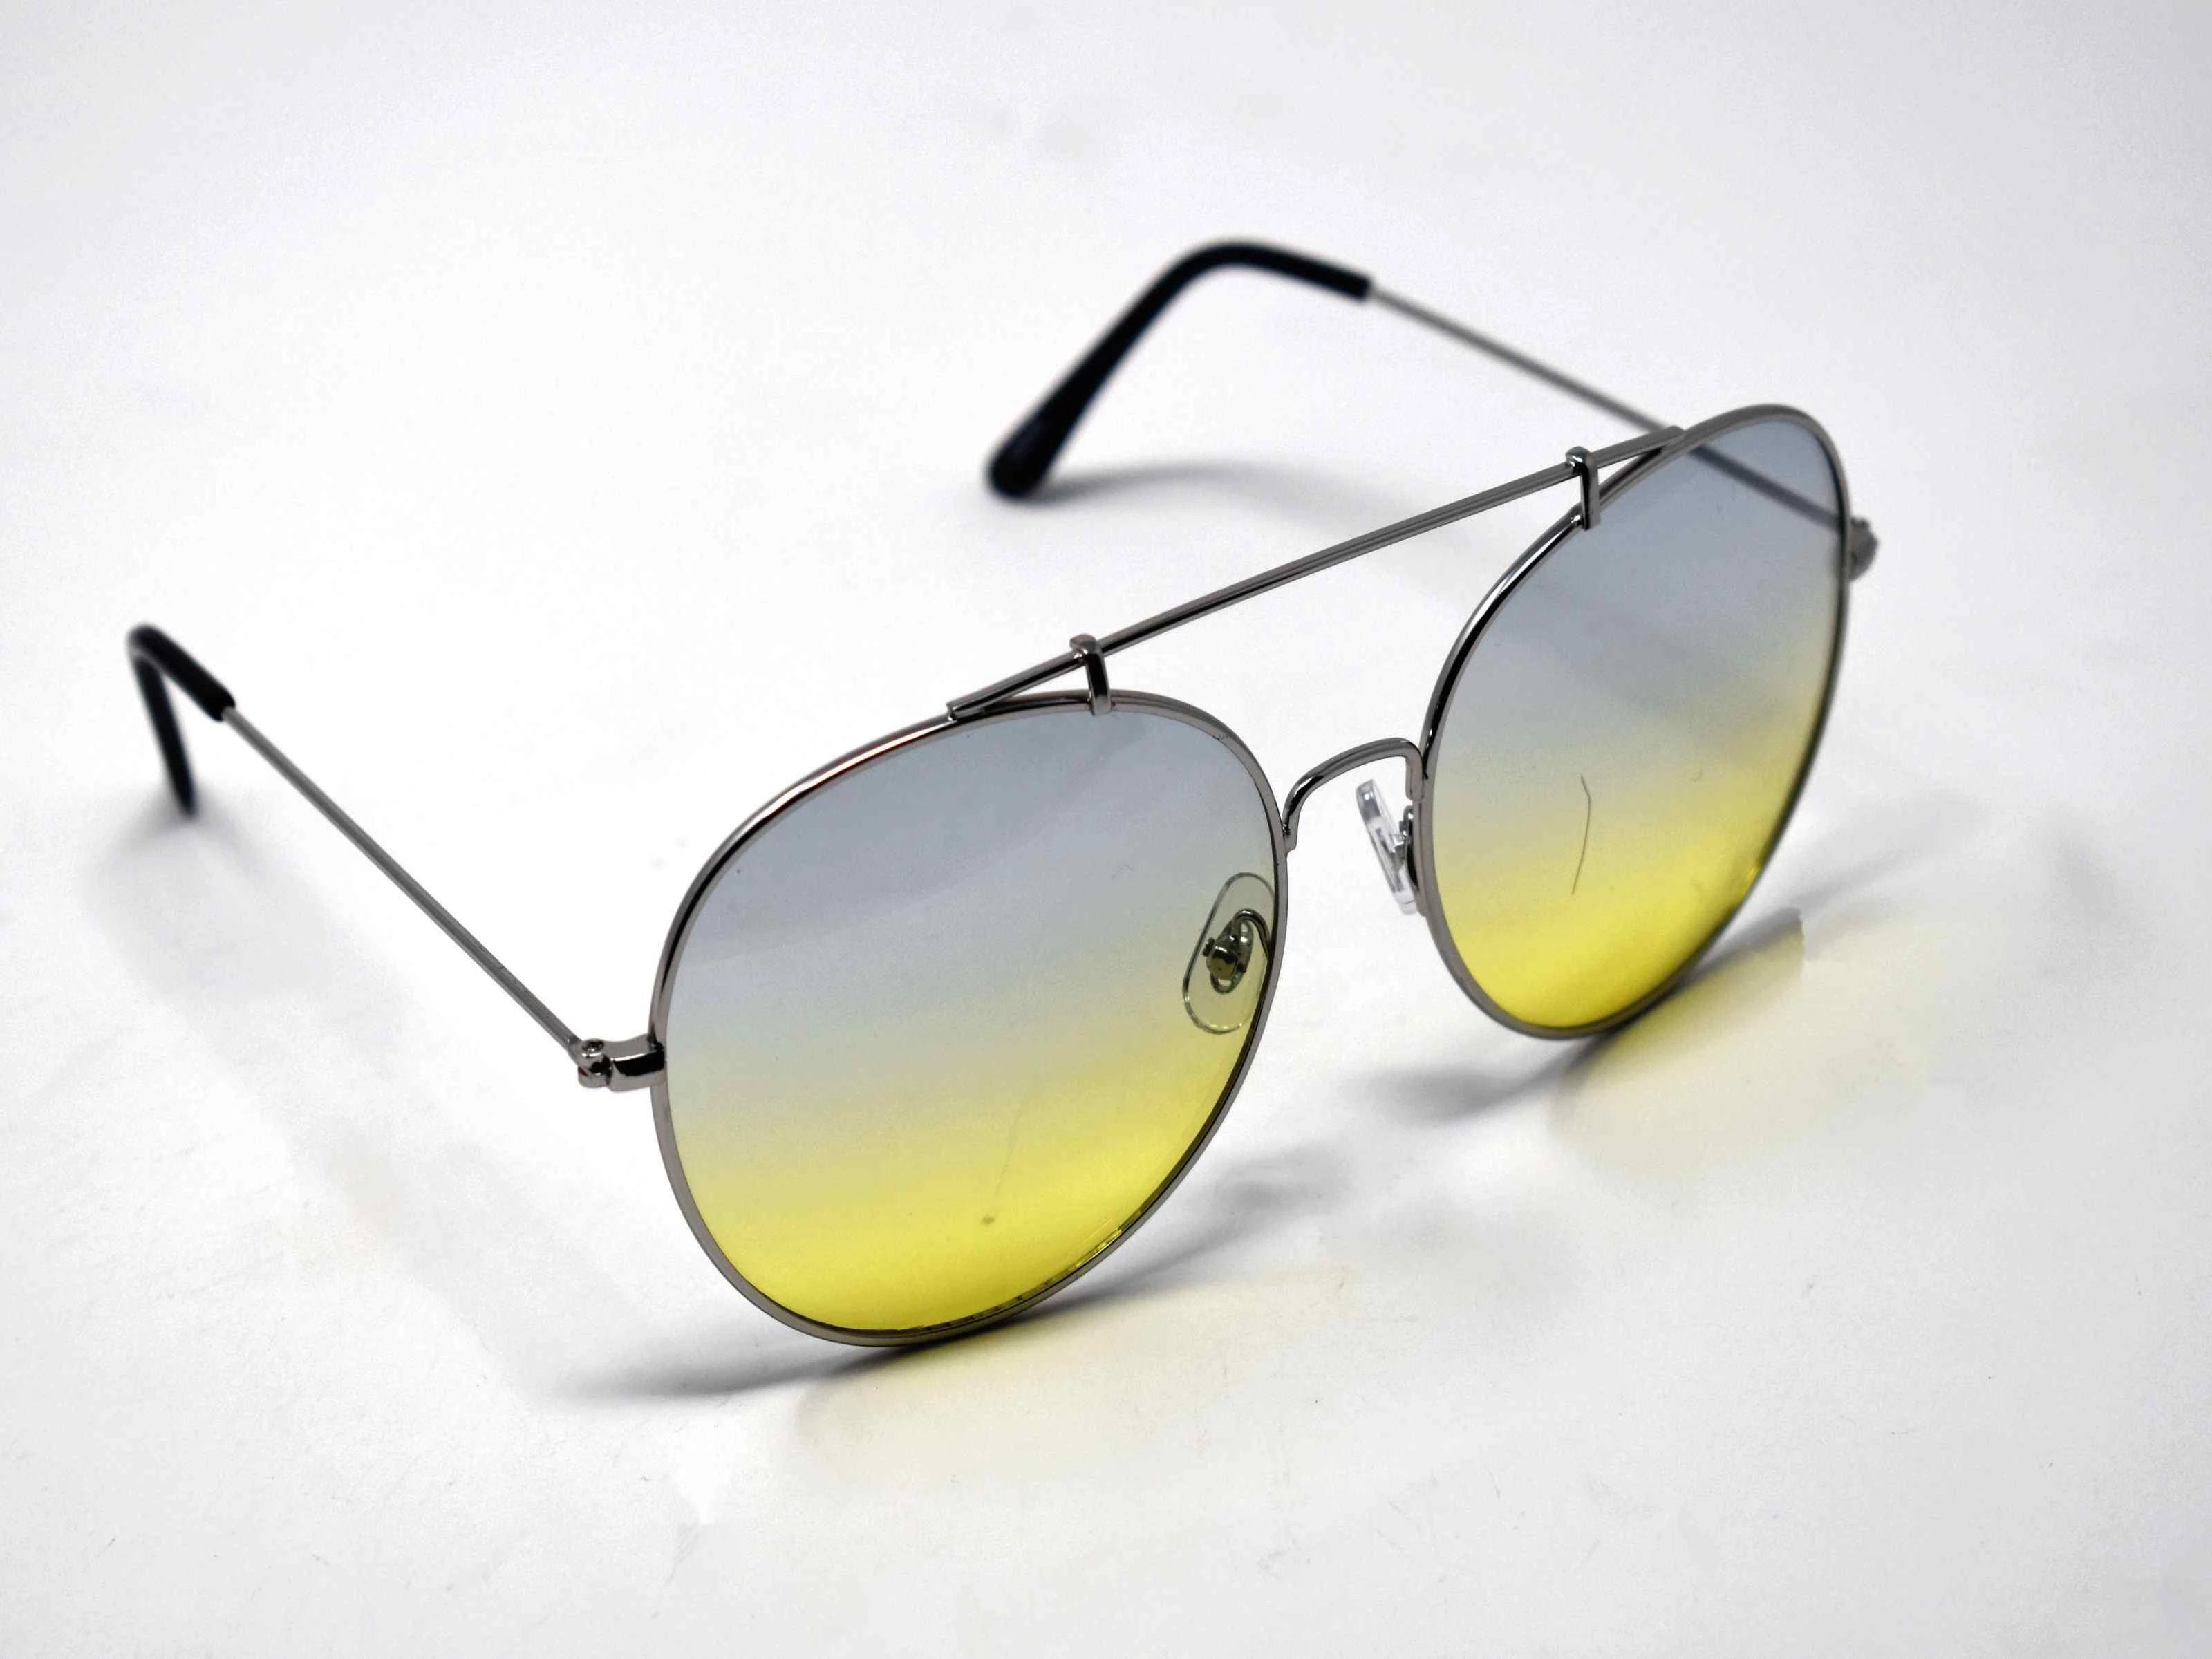 Va Va Voom will be consistently heard in these Vervain silver frame aviator Gray and Green ombre lens sunglasses.